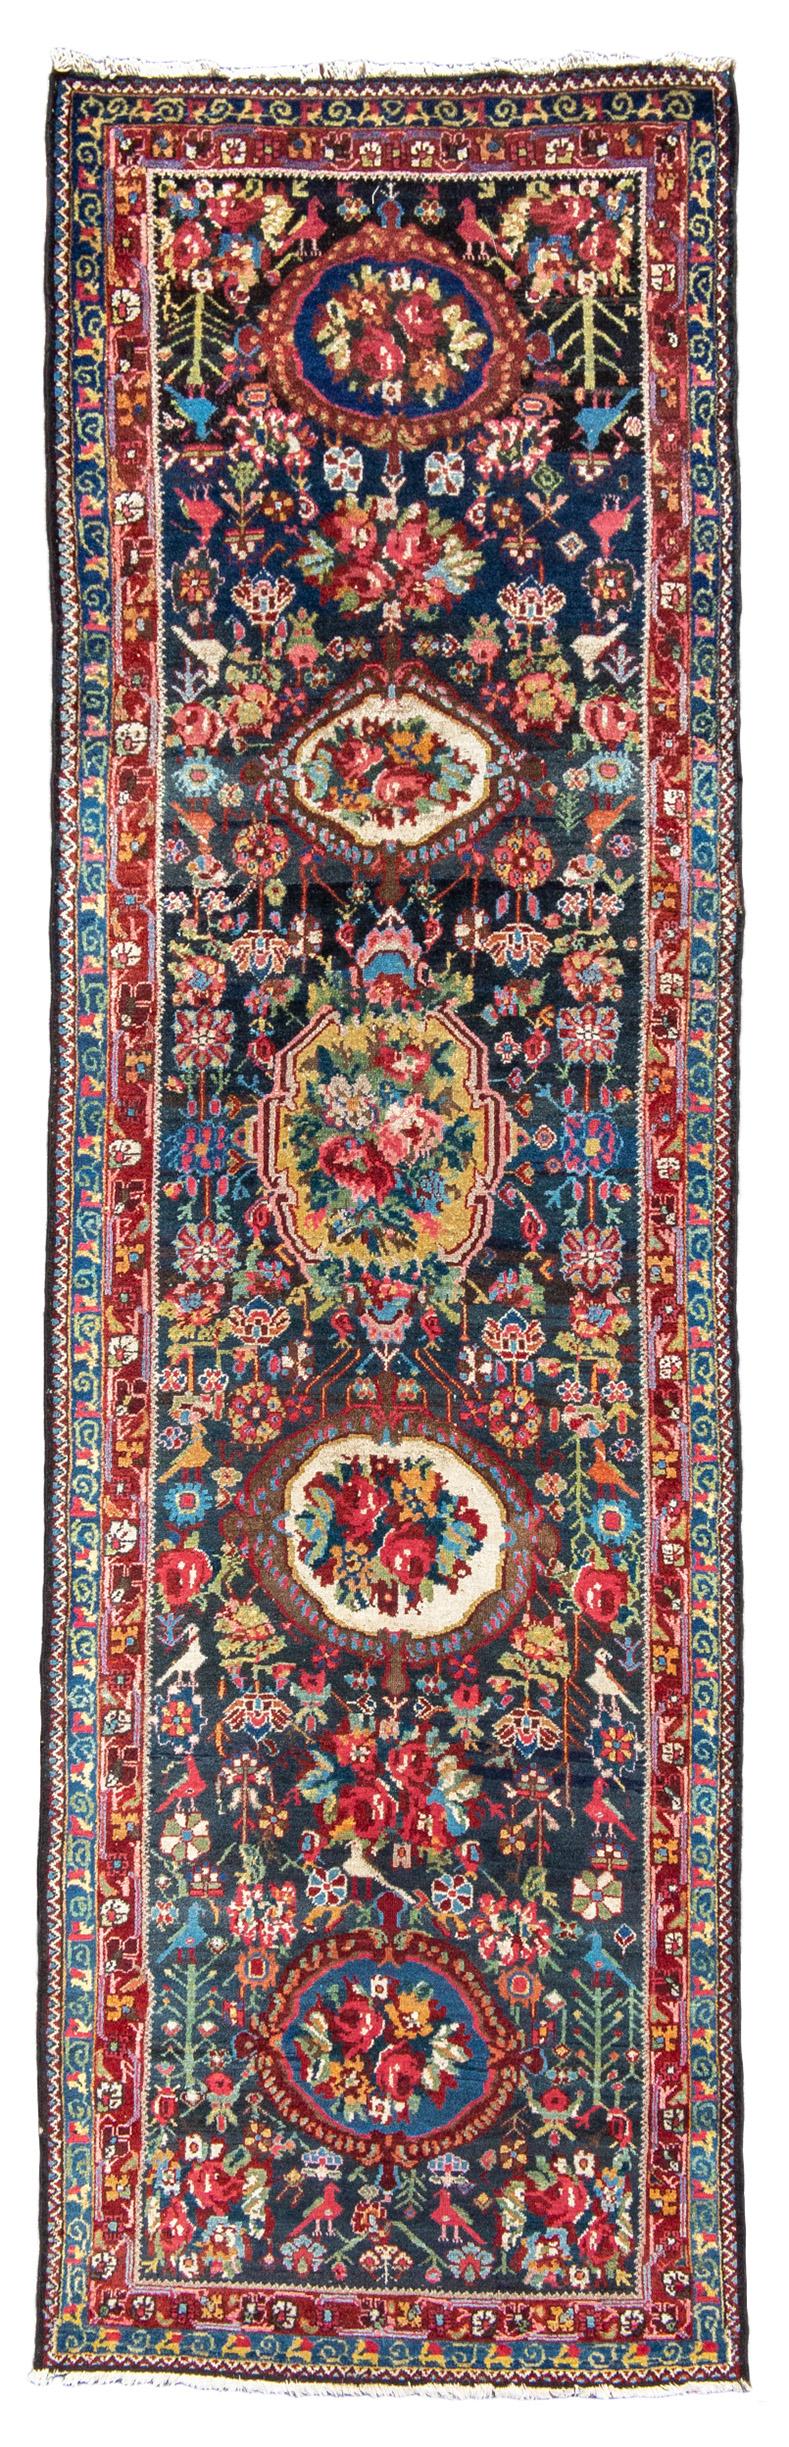 Antique Persian Bakhtiari Runner Rug, 20th Century

Incorporation of European design motifs like cabbage roses but also the occasional nomadic folk art figures.

Additional information:
Dimensions: 3'6